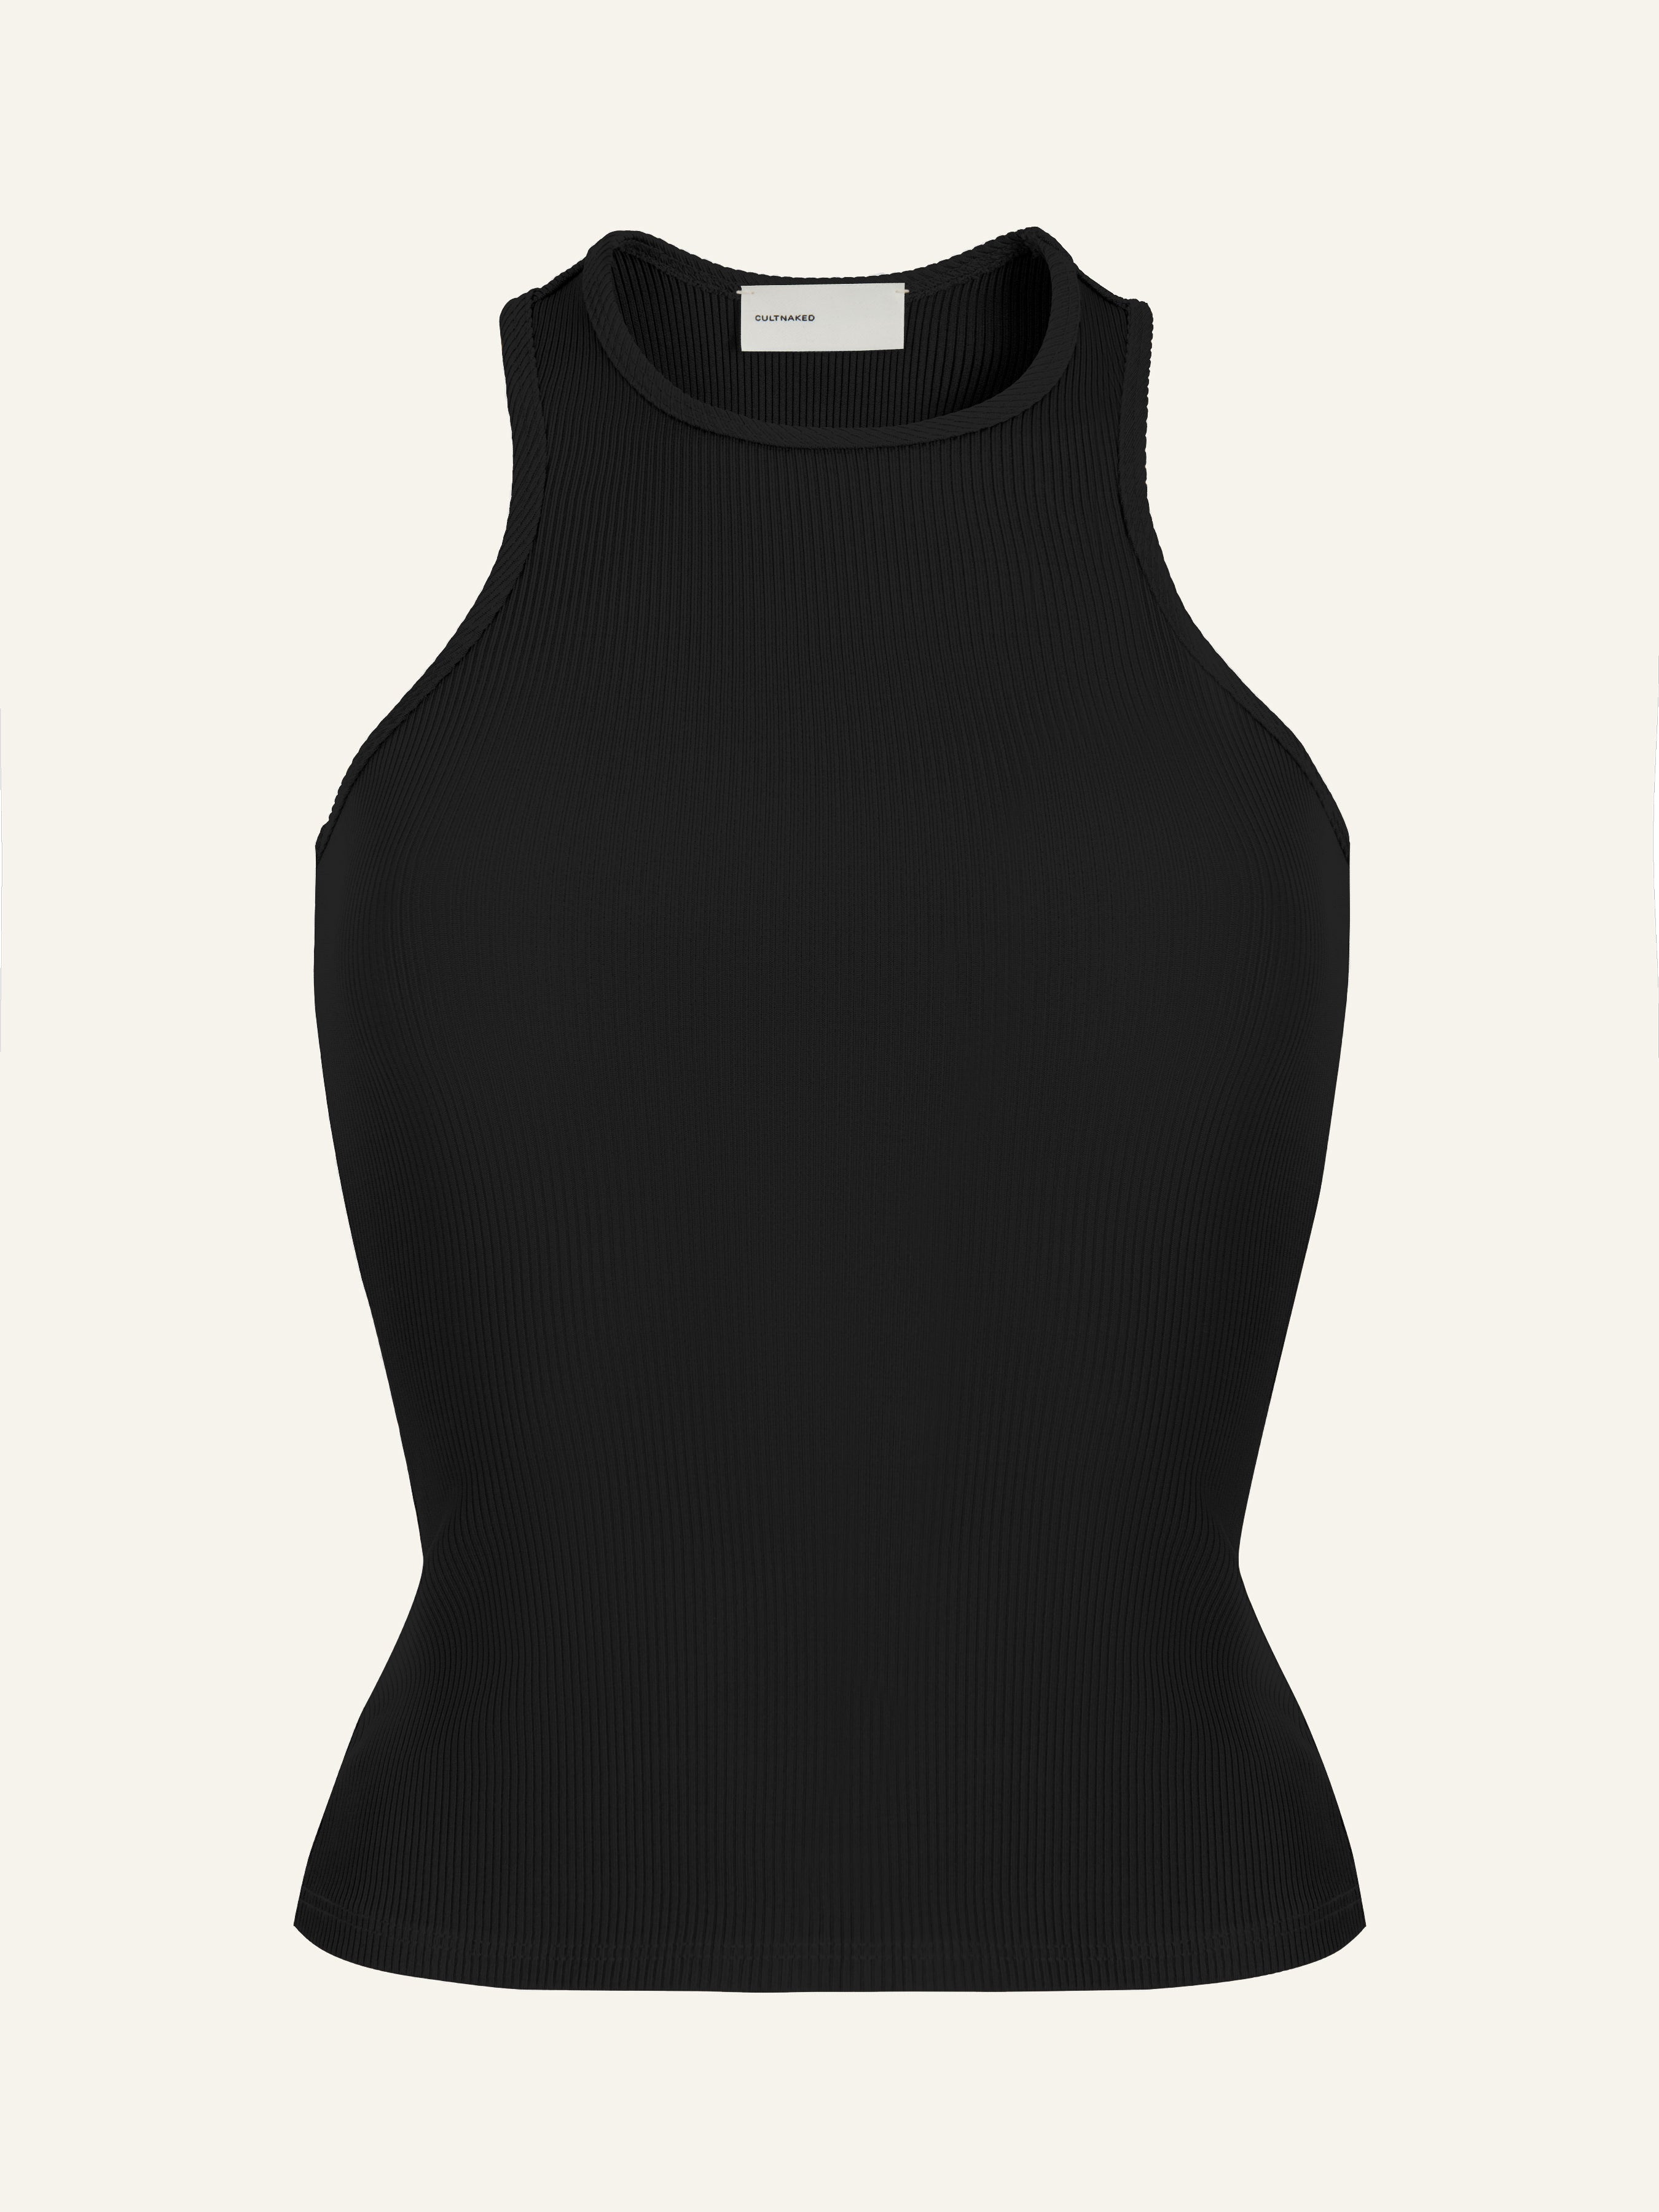 Product photography of black viscose tank top